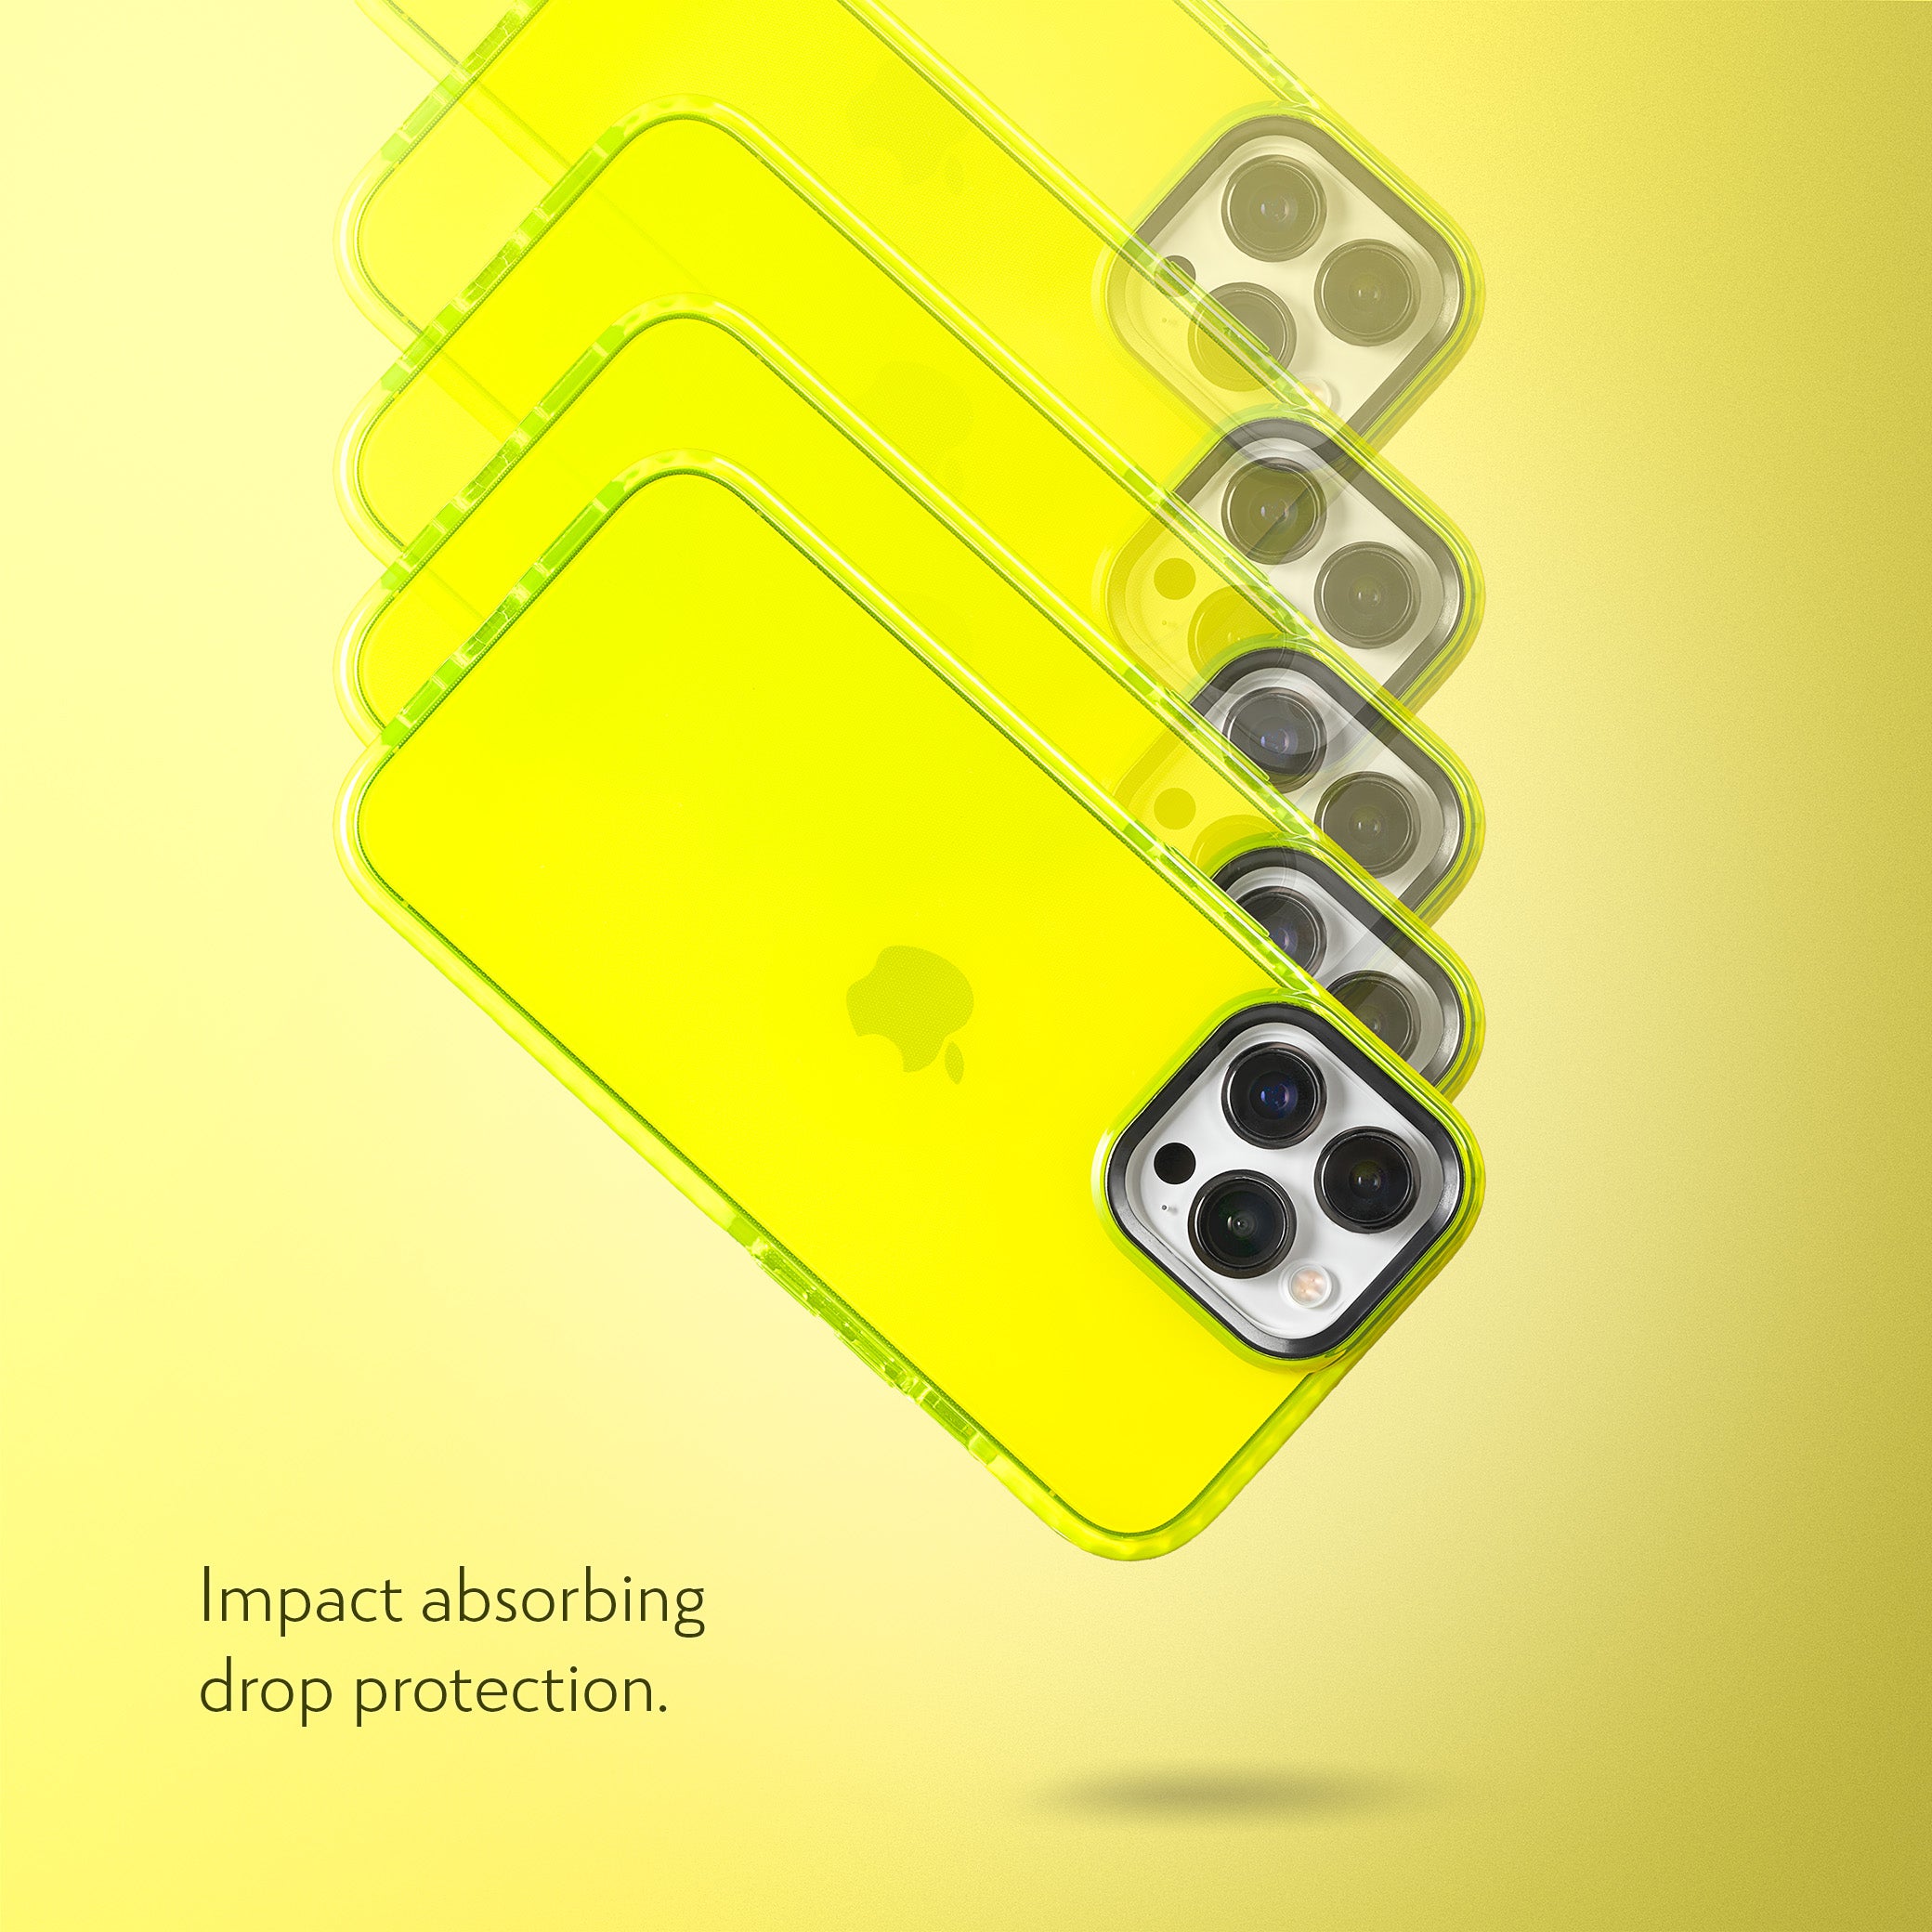 Barrier Case for iPhone 13 Pro Max - Hi-Energy Neon Yellow